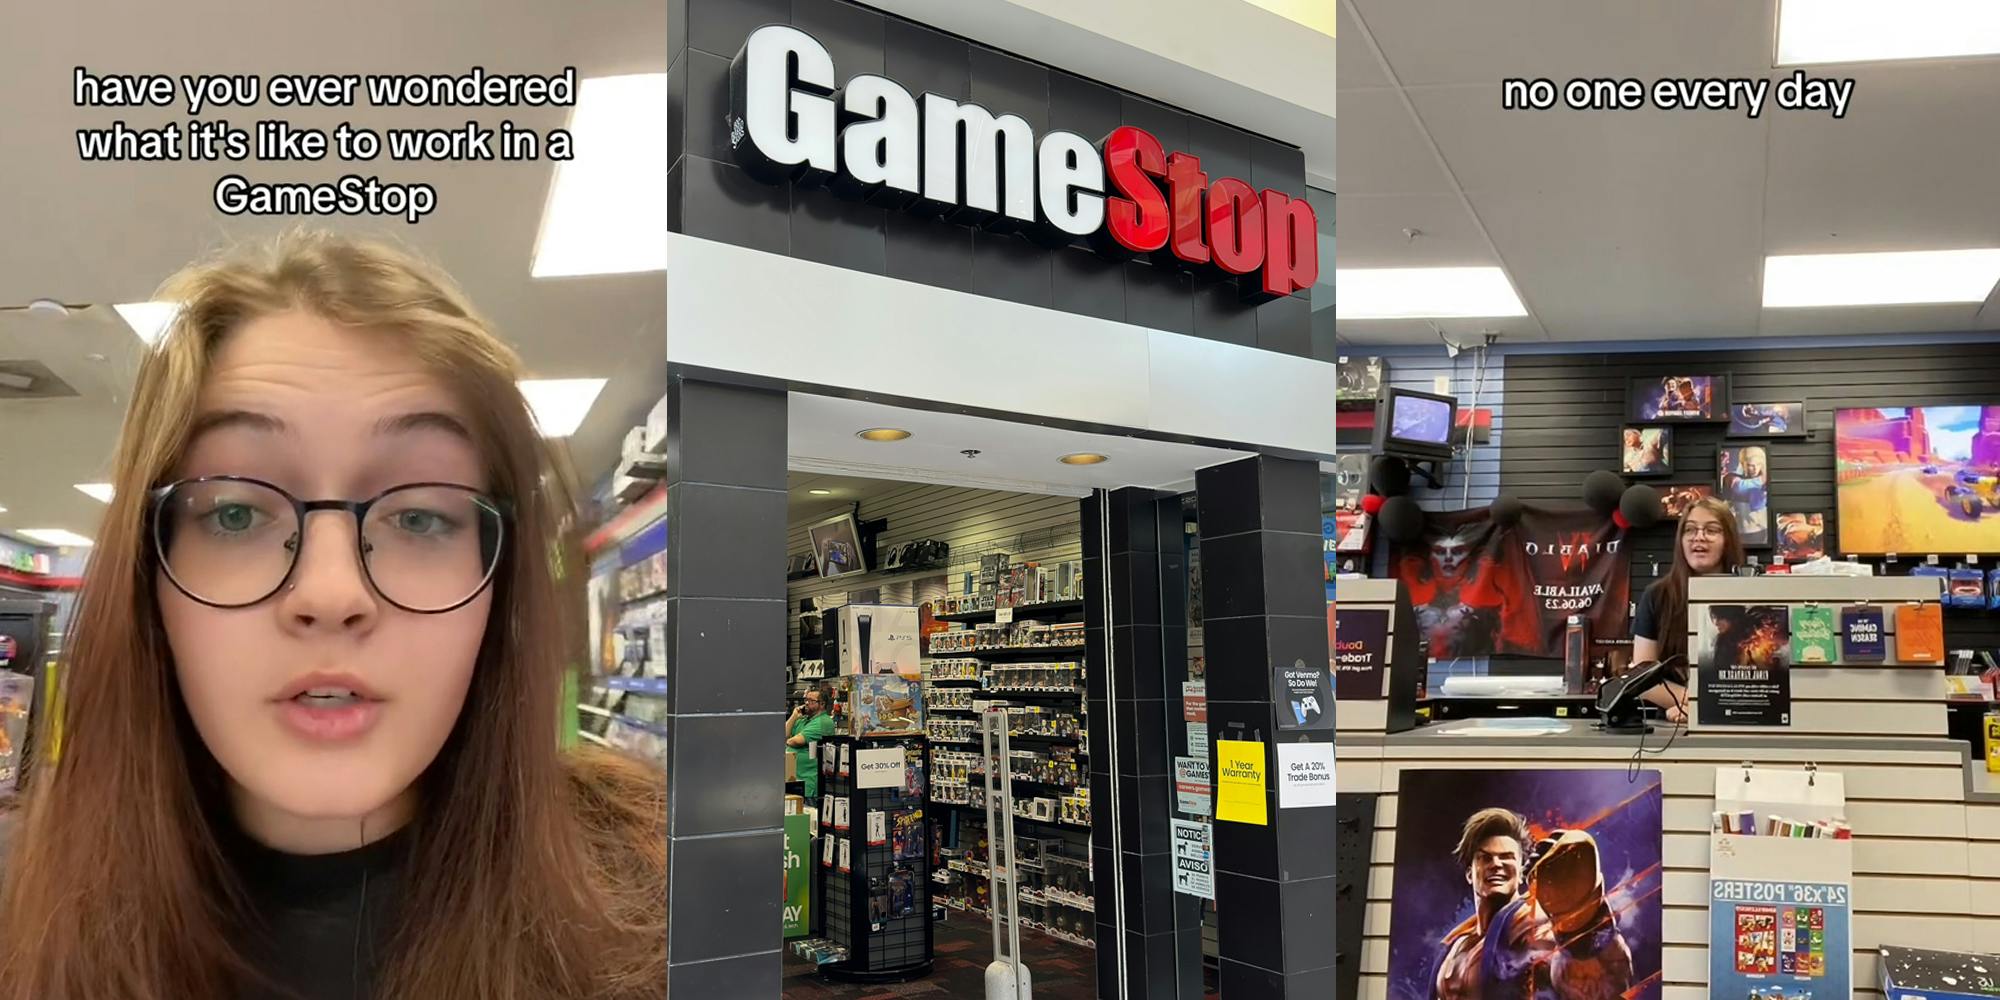 GameStop employee with caption "have you ever wondered what it's like to work in a GameStop" (l) GameStop store entrance with sign (c) GameStop employee with caption "no one every day" (r)